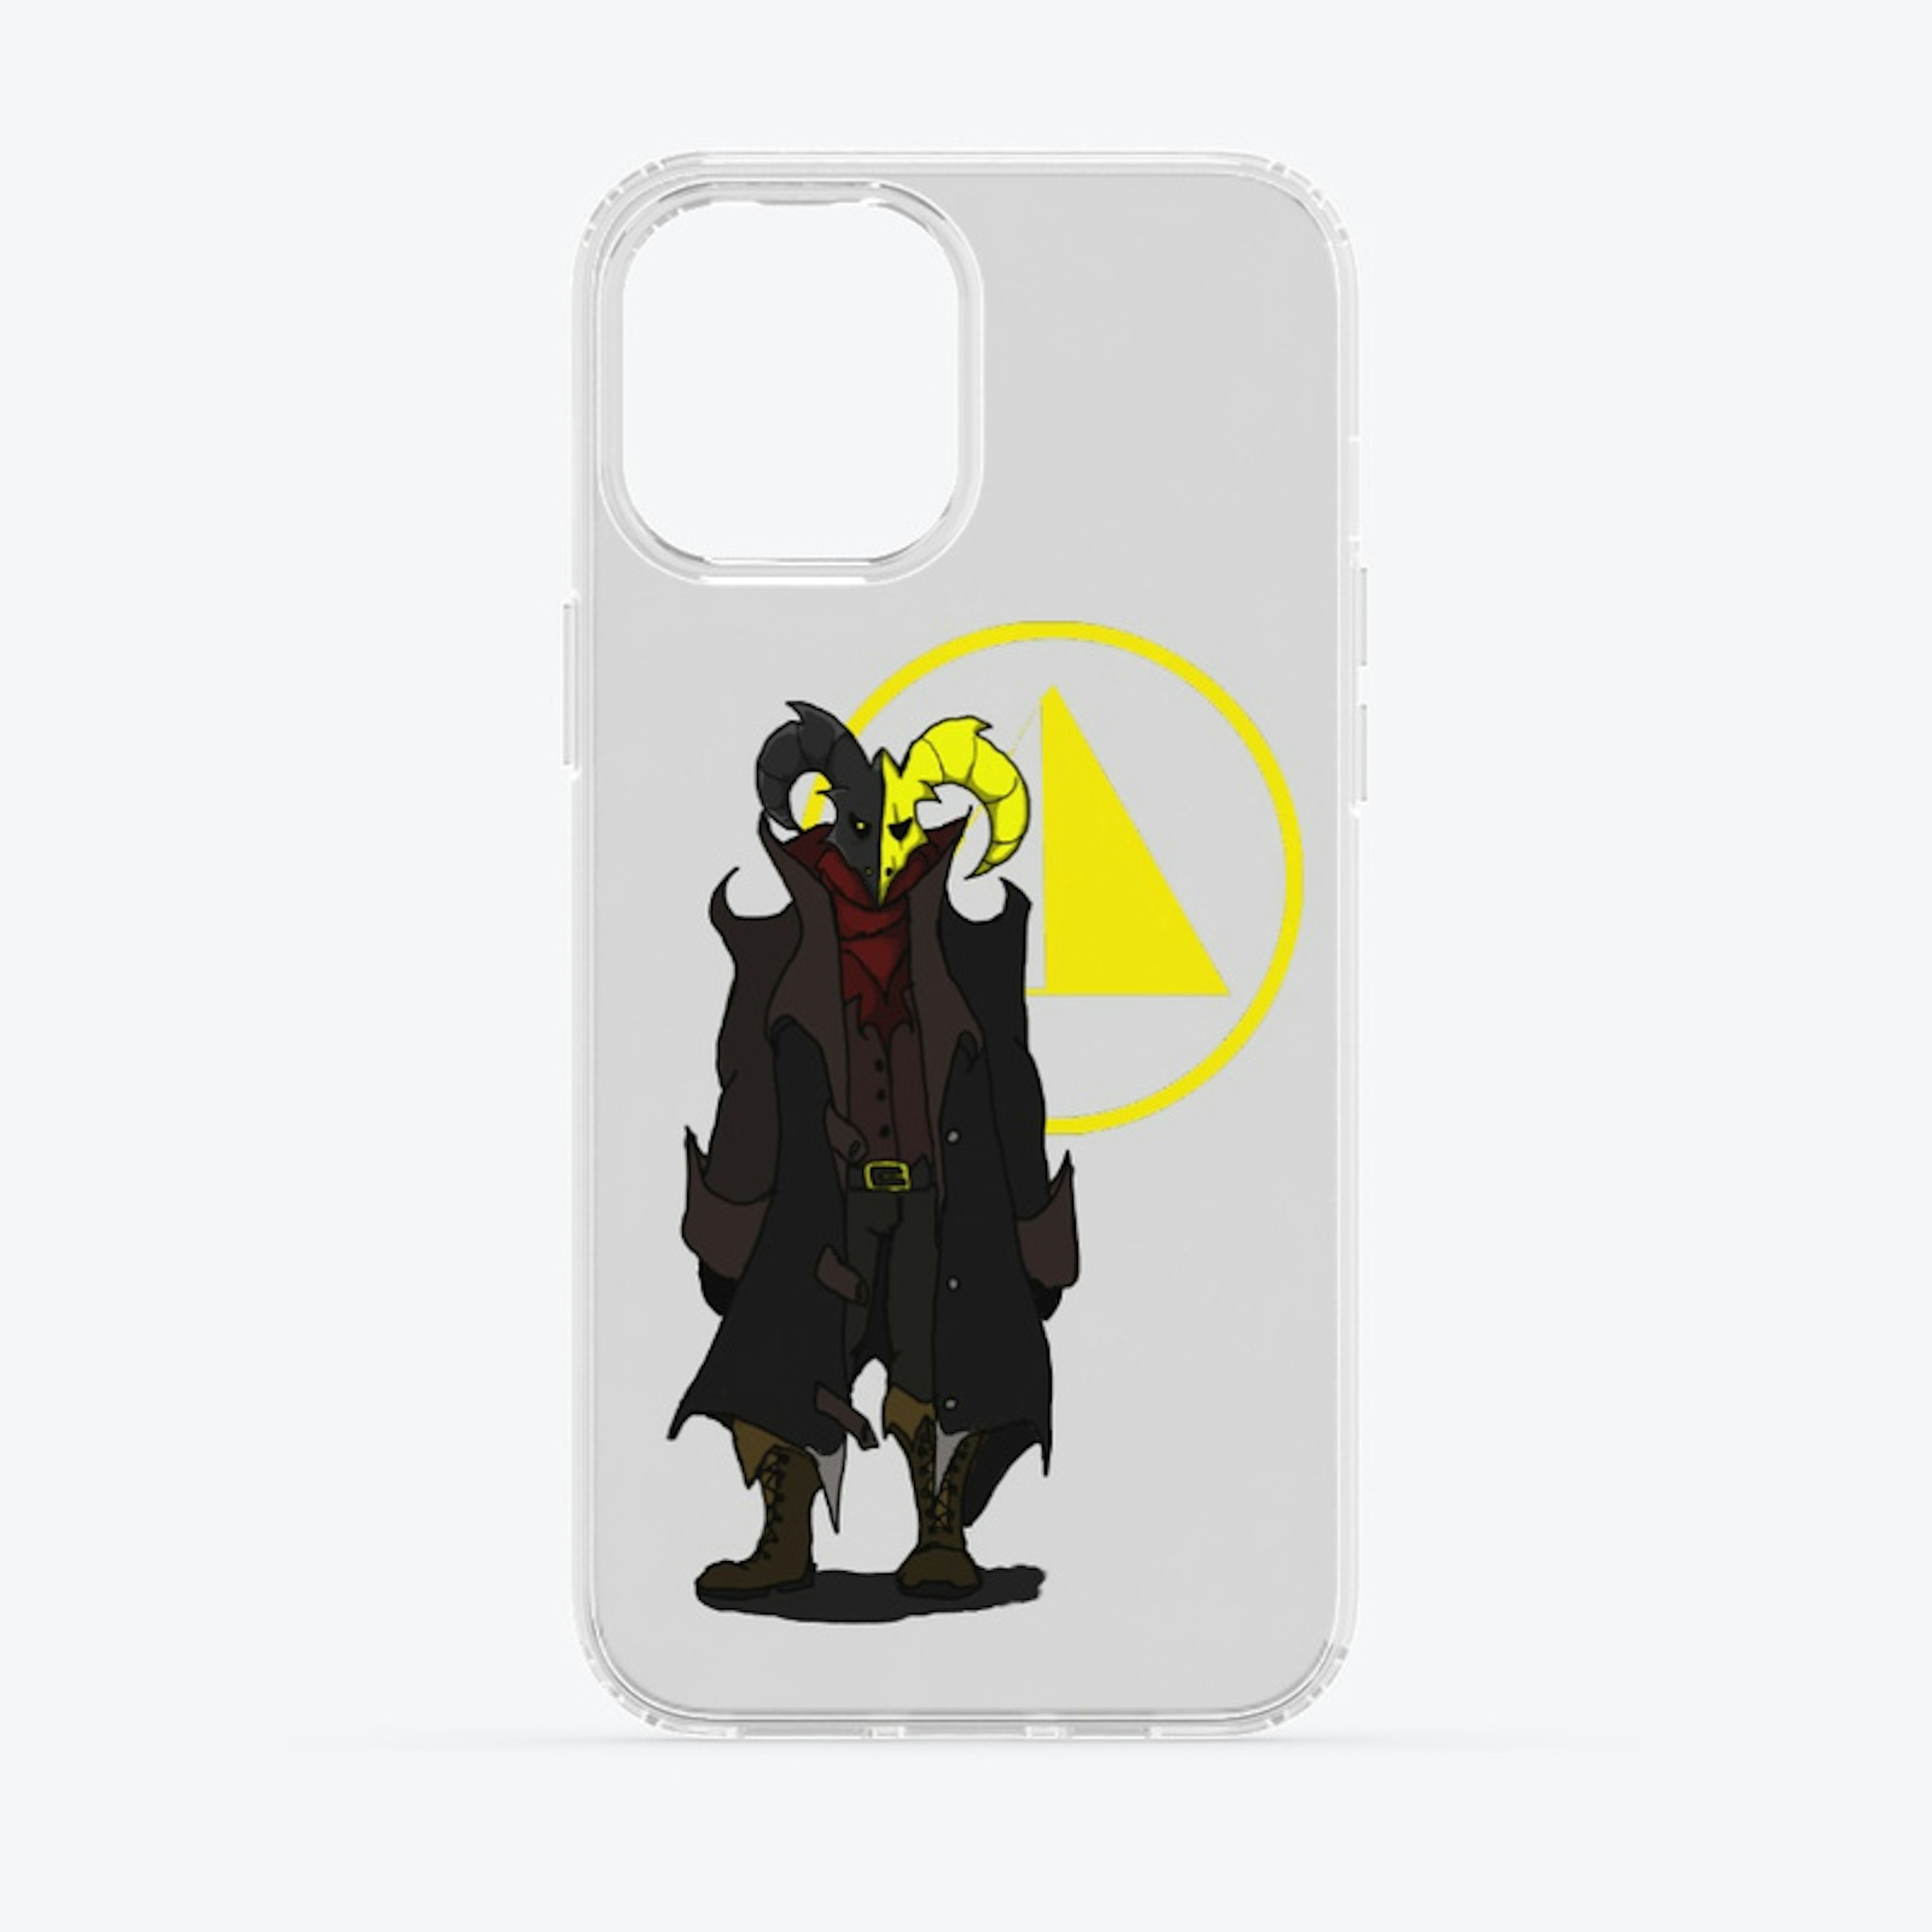 iPhone Reaper Character Case